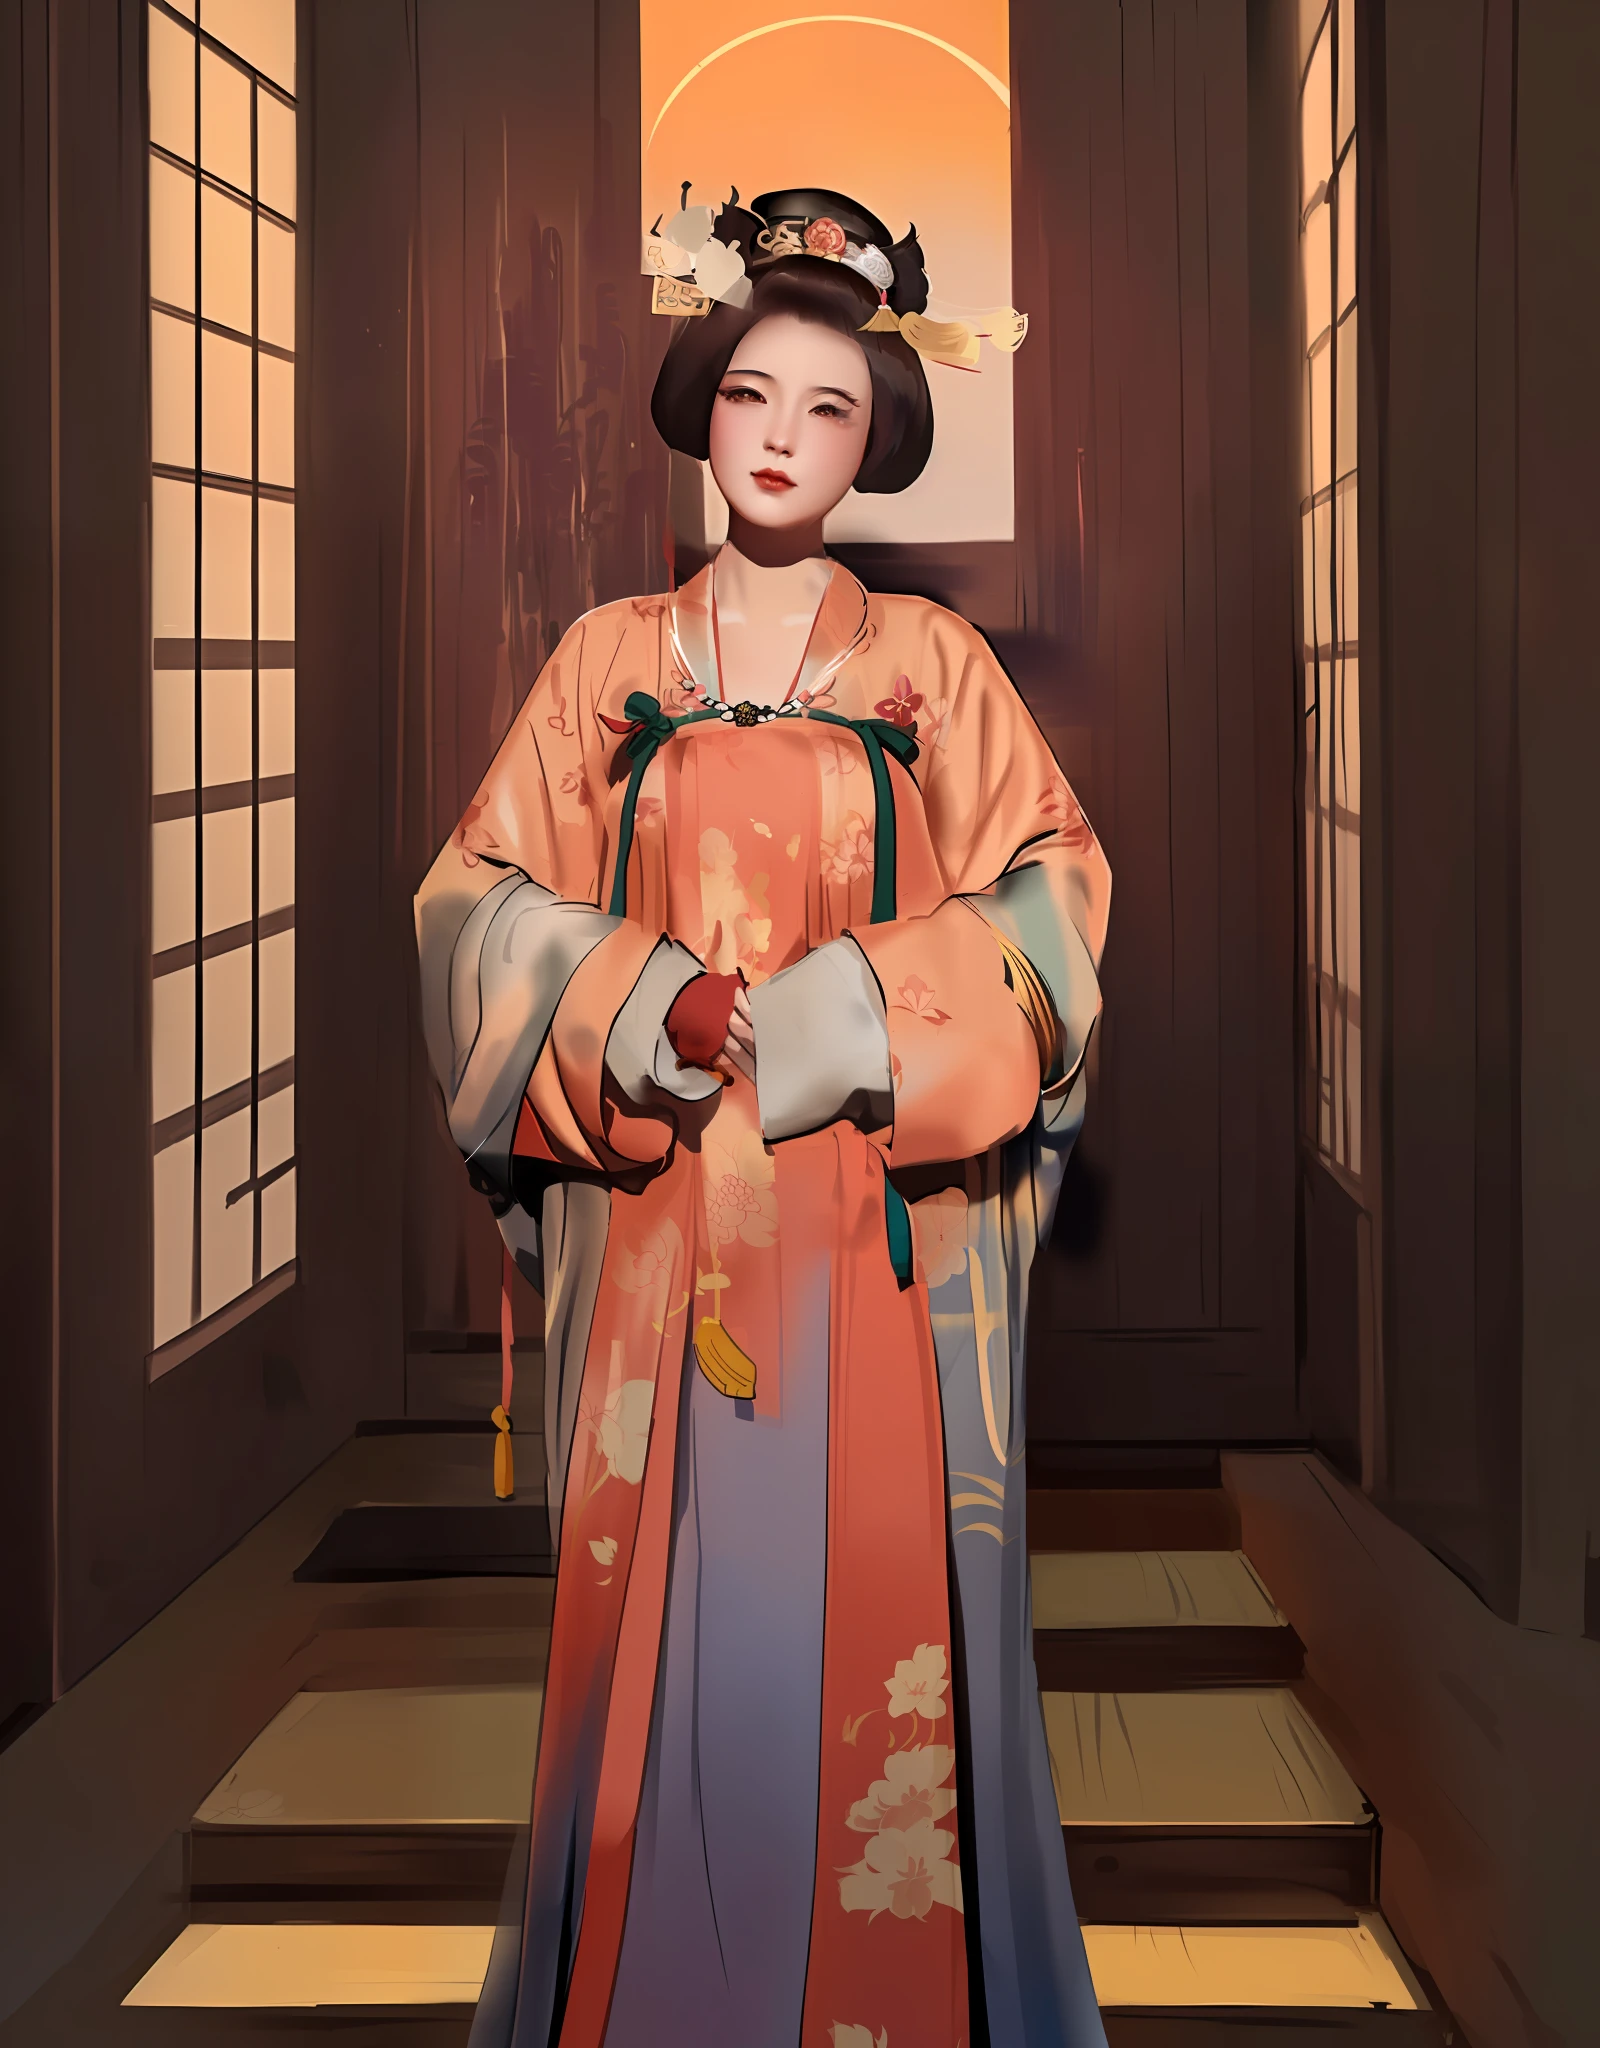 arafed woman in a kimono dress and hat posing for a picture, Inspired by Uemura Shōen, palace ， a girl in hanfu, artwork in the style of guweiz, chinese empress, inspired by Wang Meng, inspired by Min Zhen, inspired by Yun Du-seo, inspired by Yun Shouping, inspired by Lan Ying